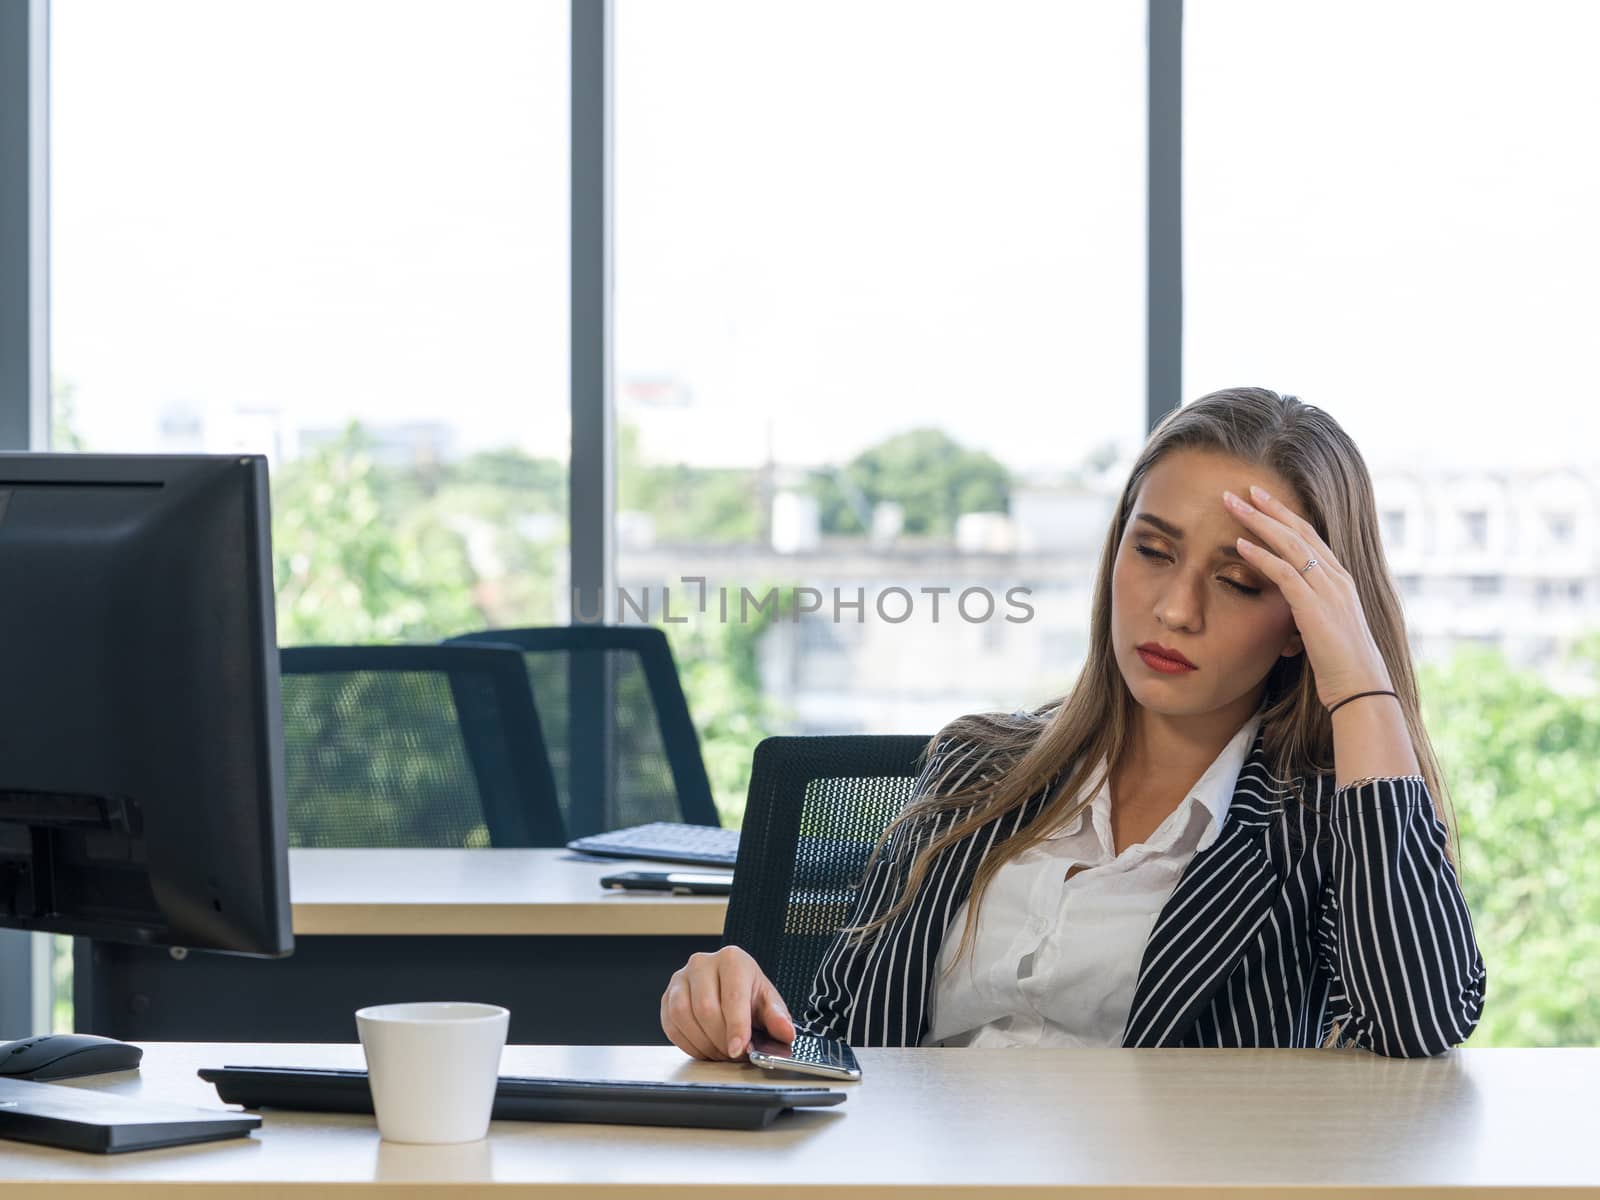 Morning work atmosphere In a modern office. Teen employees rest her eyes due to dizziness and headaches. After clearing the remaining pending work.